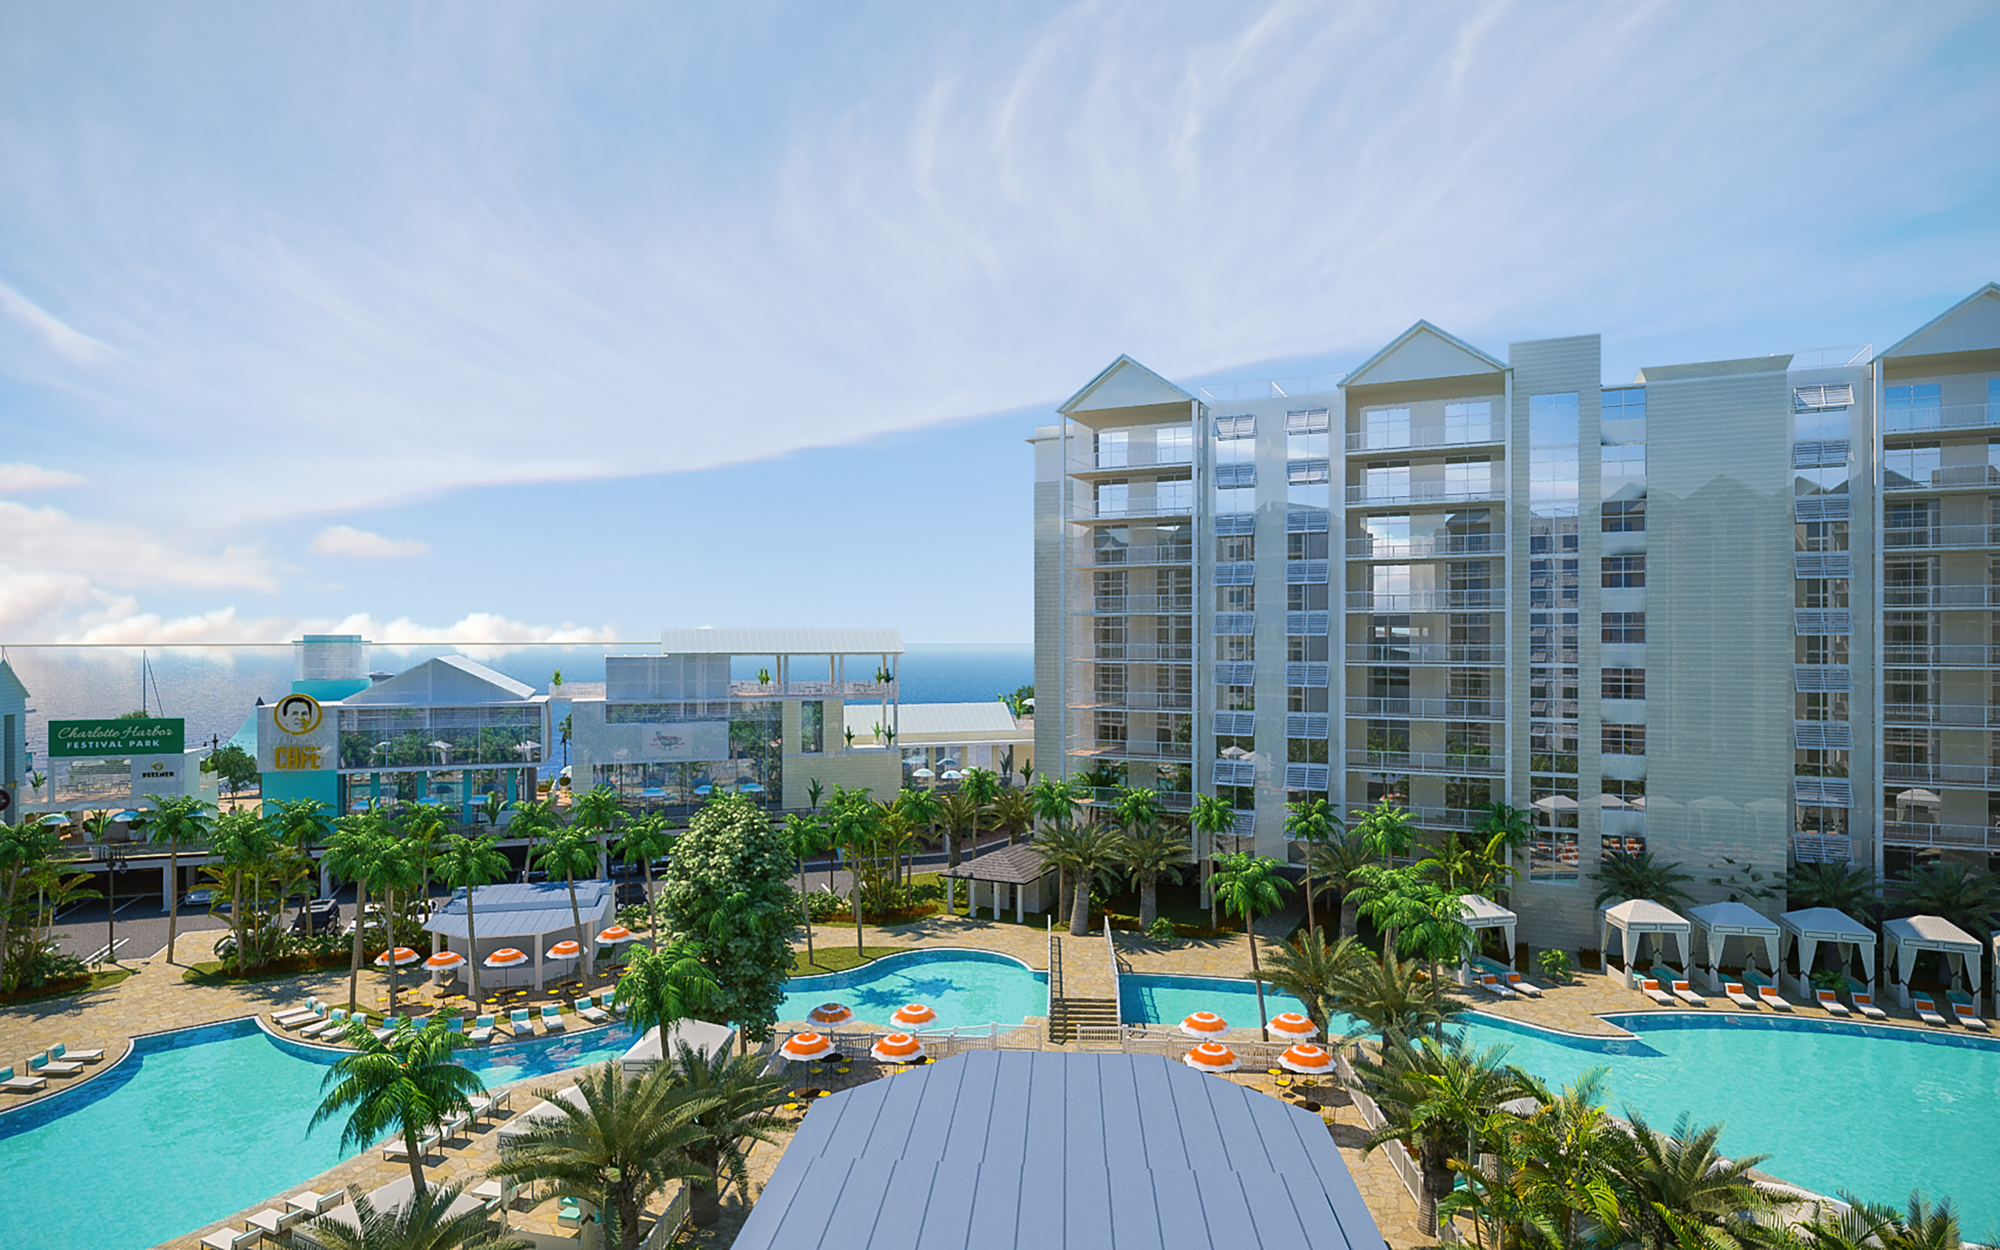 The Sunseeker Resort in Port Charlotte may include restaurants, shopping, hotels and condominium towers.